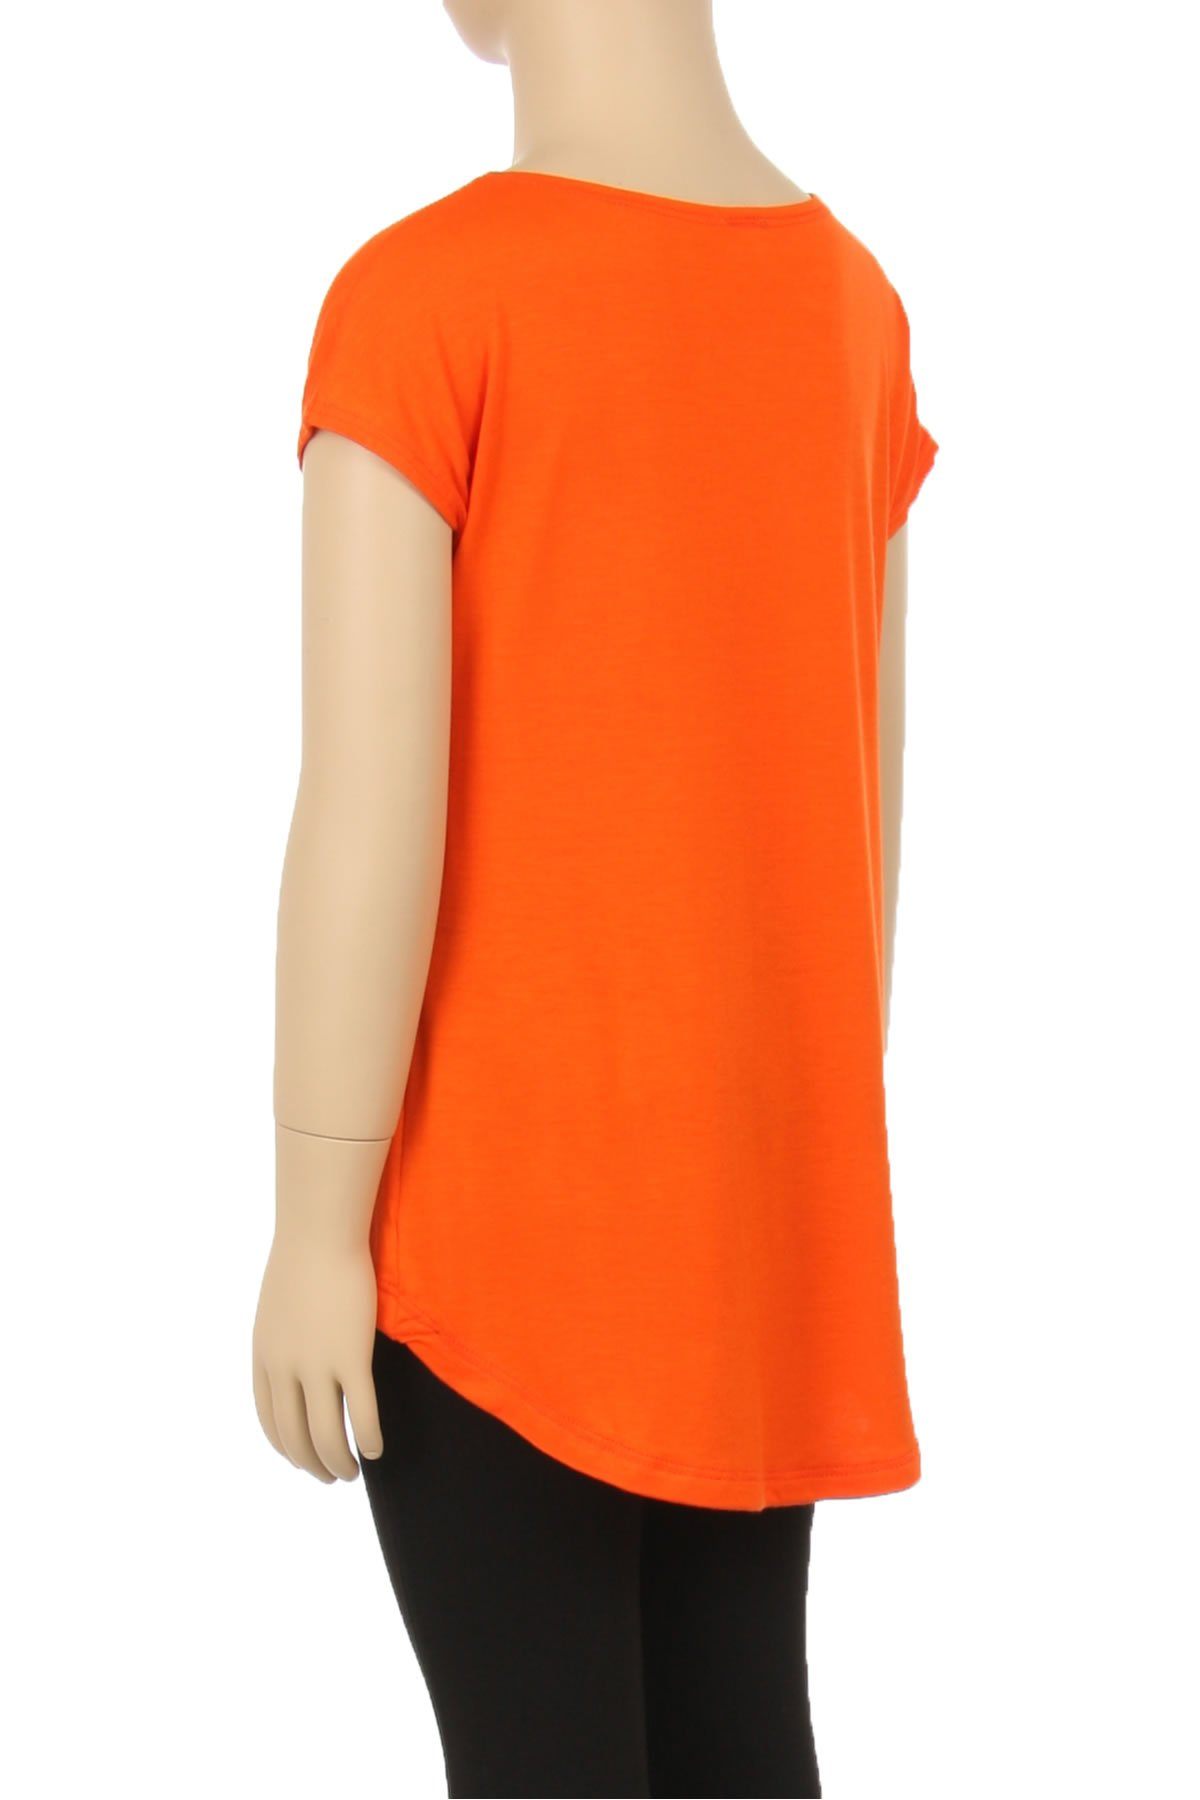 Orange Solid Top For Girls Short Sleeve Shirt: 6/8/10/12 Tops MomMe and More 